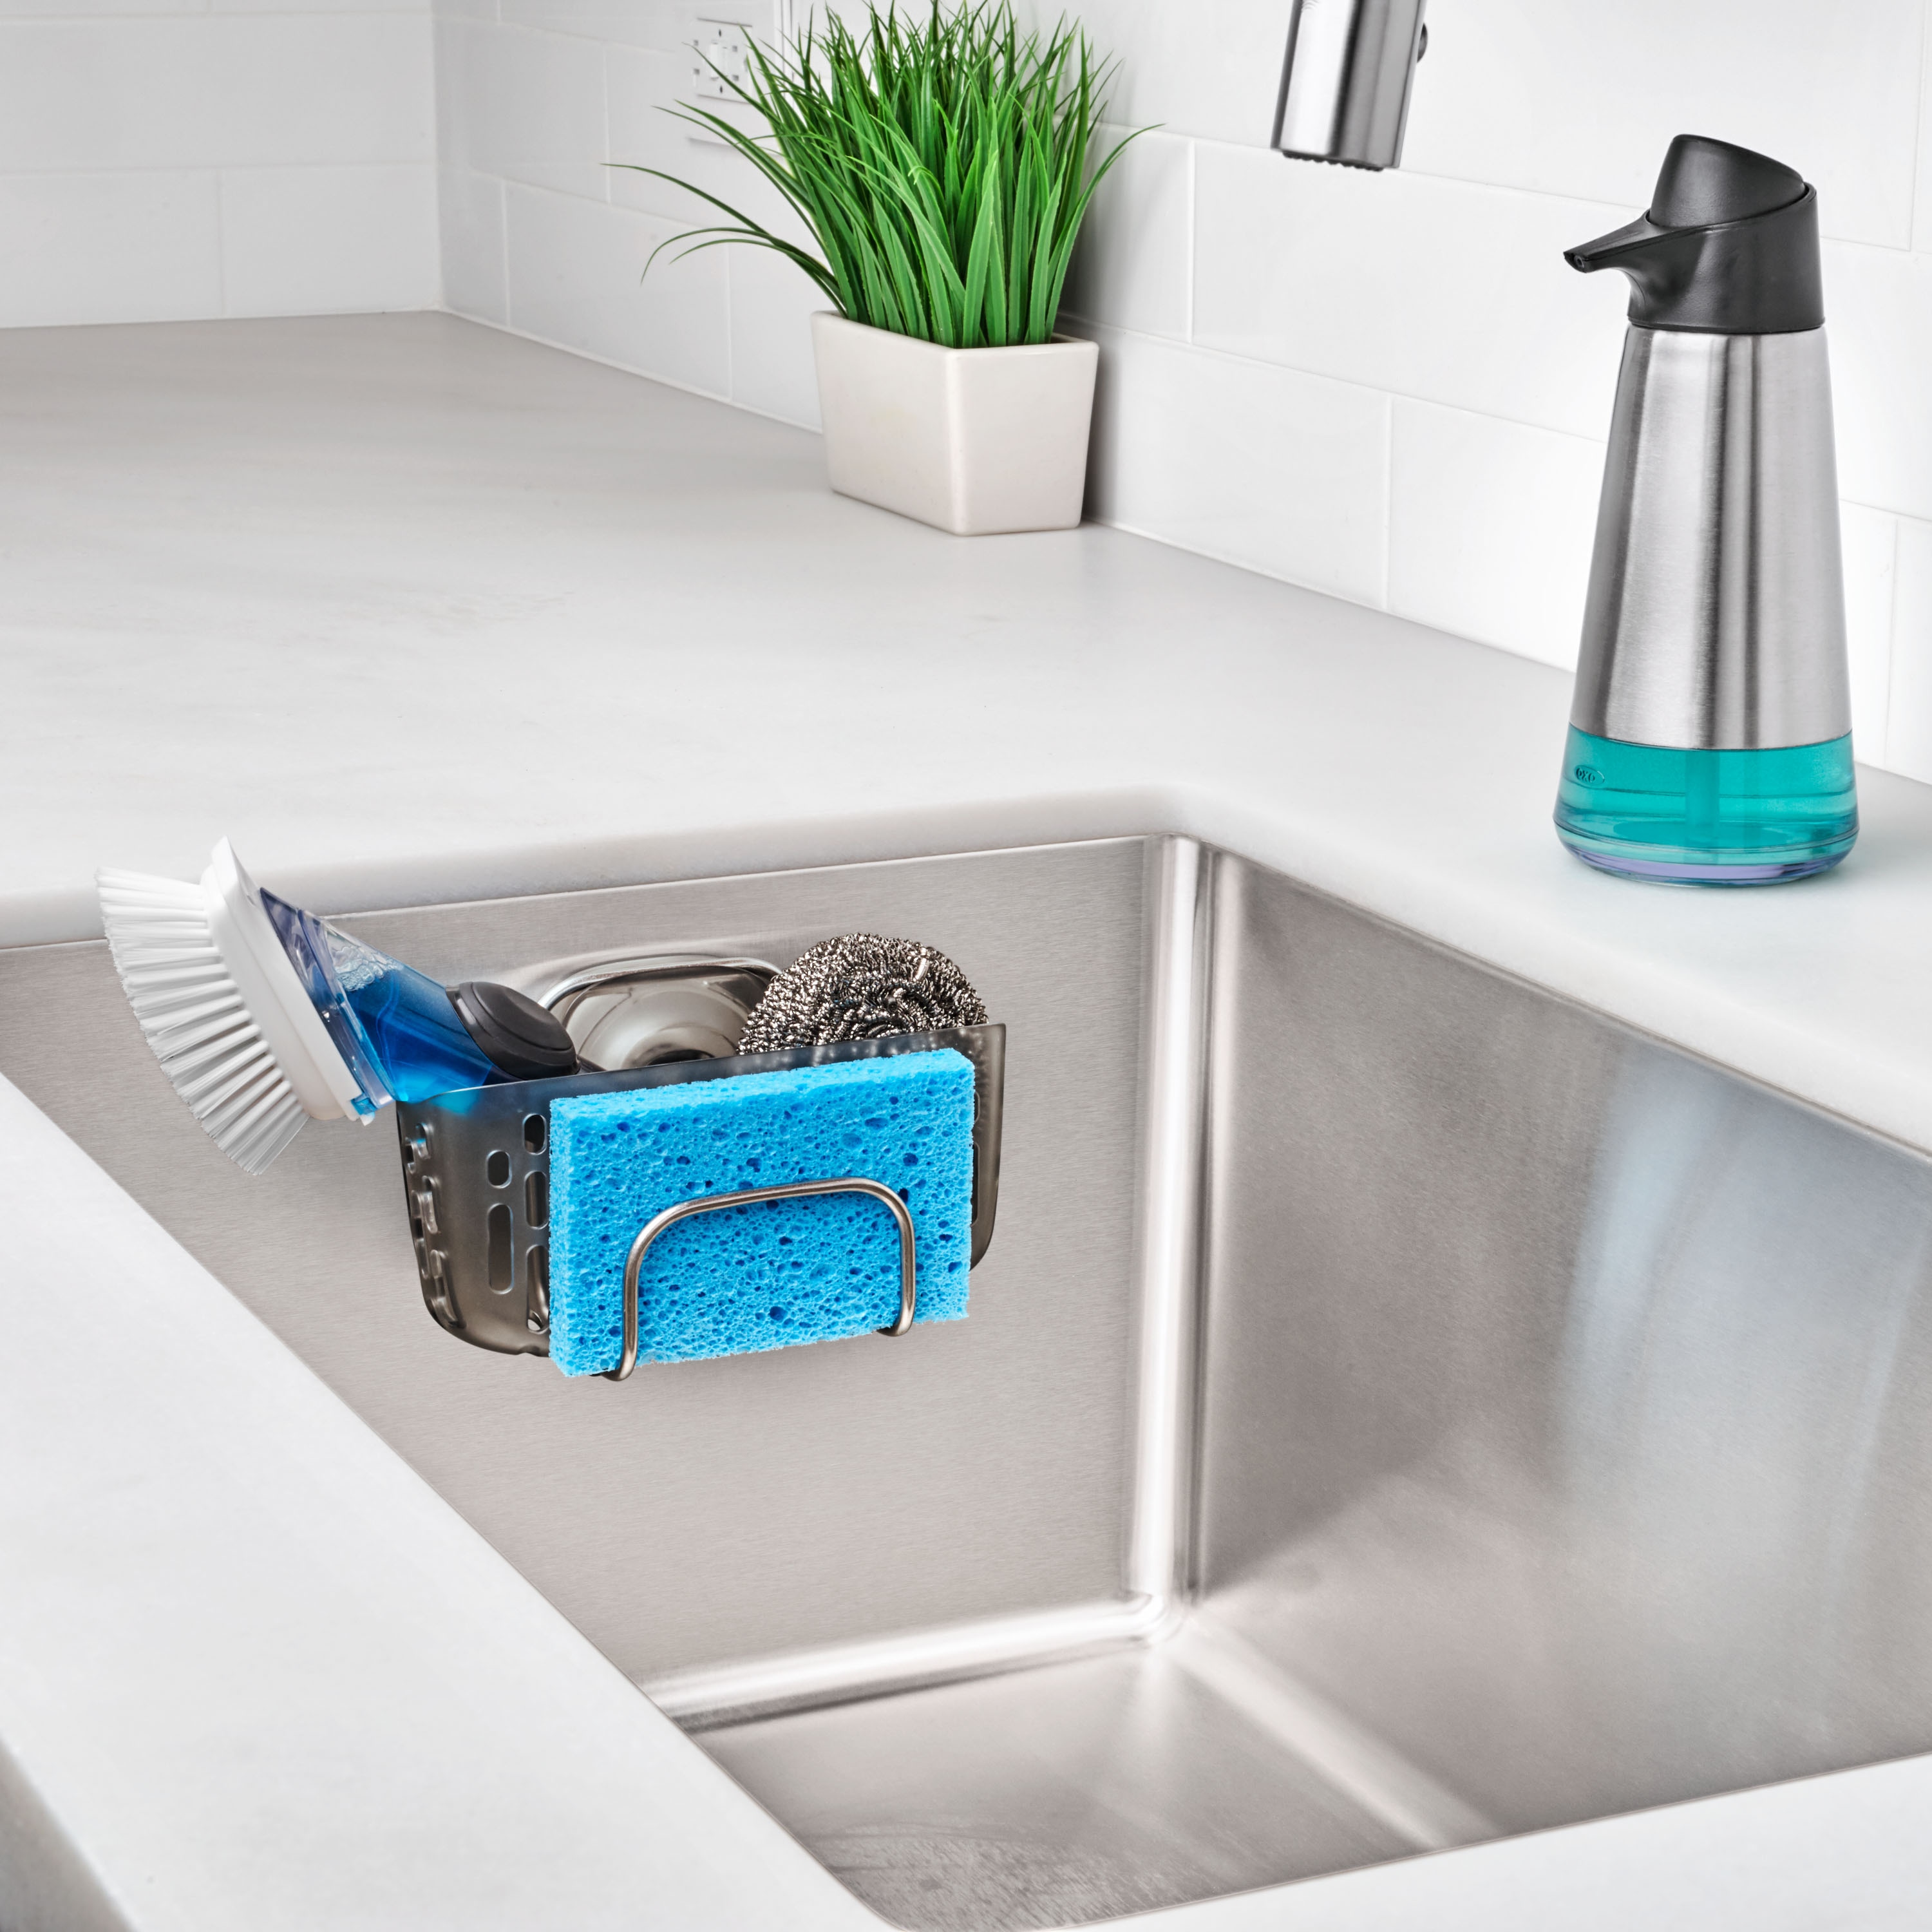 OXO Good Grips StrongHold™ Suction Sink Caddy - Gray, Securely